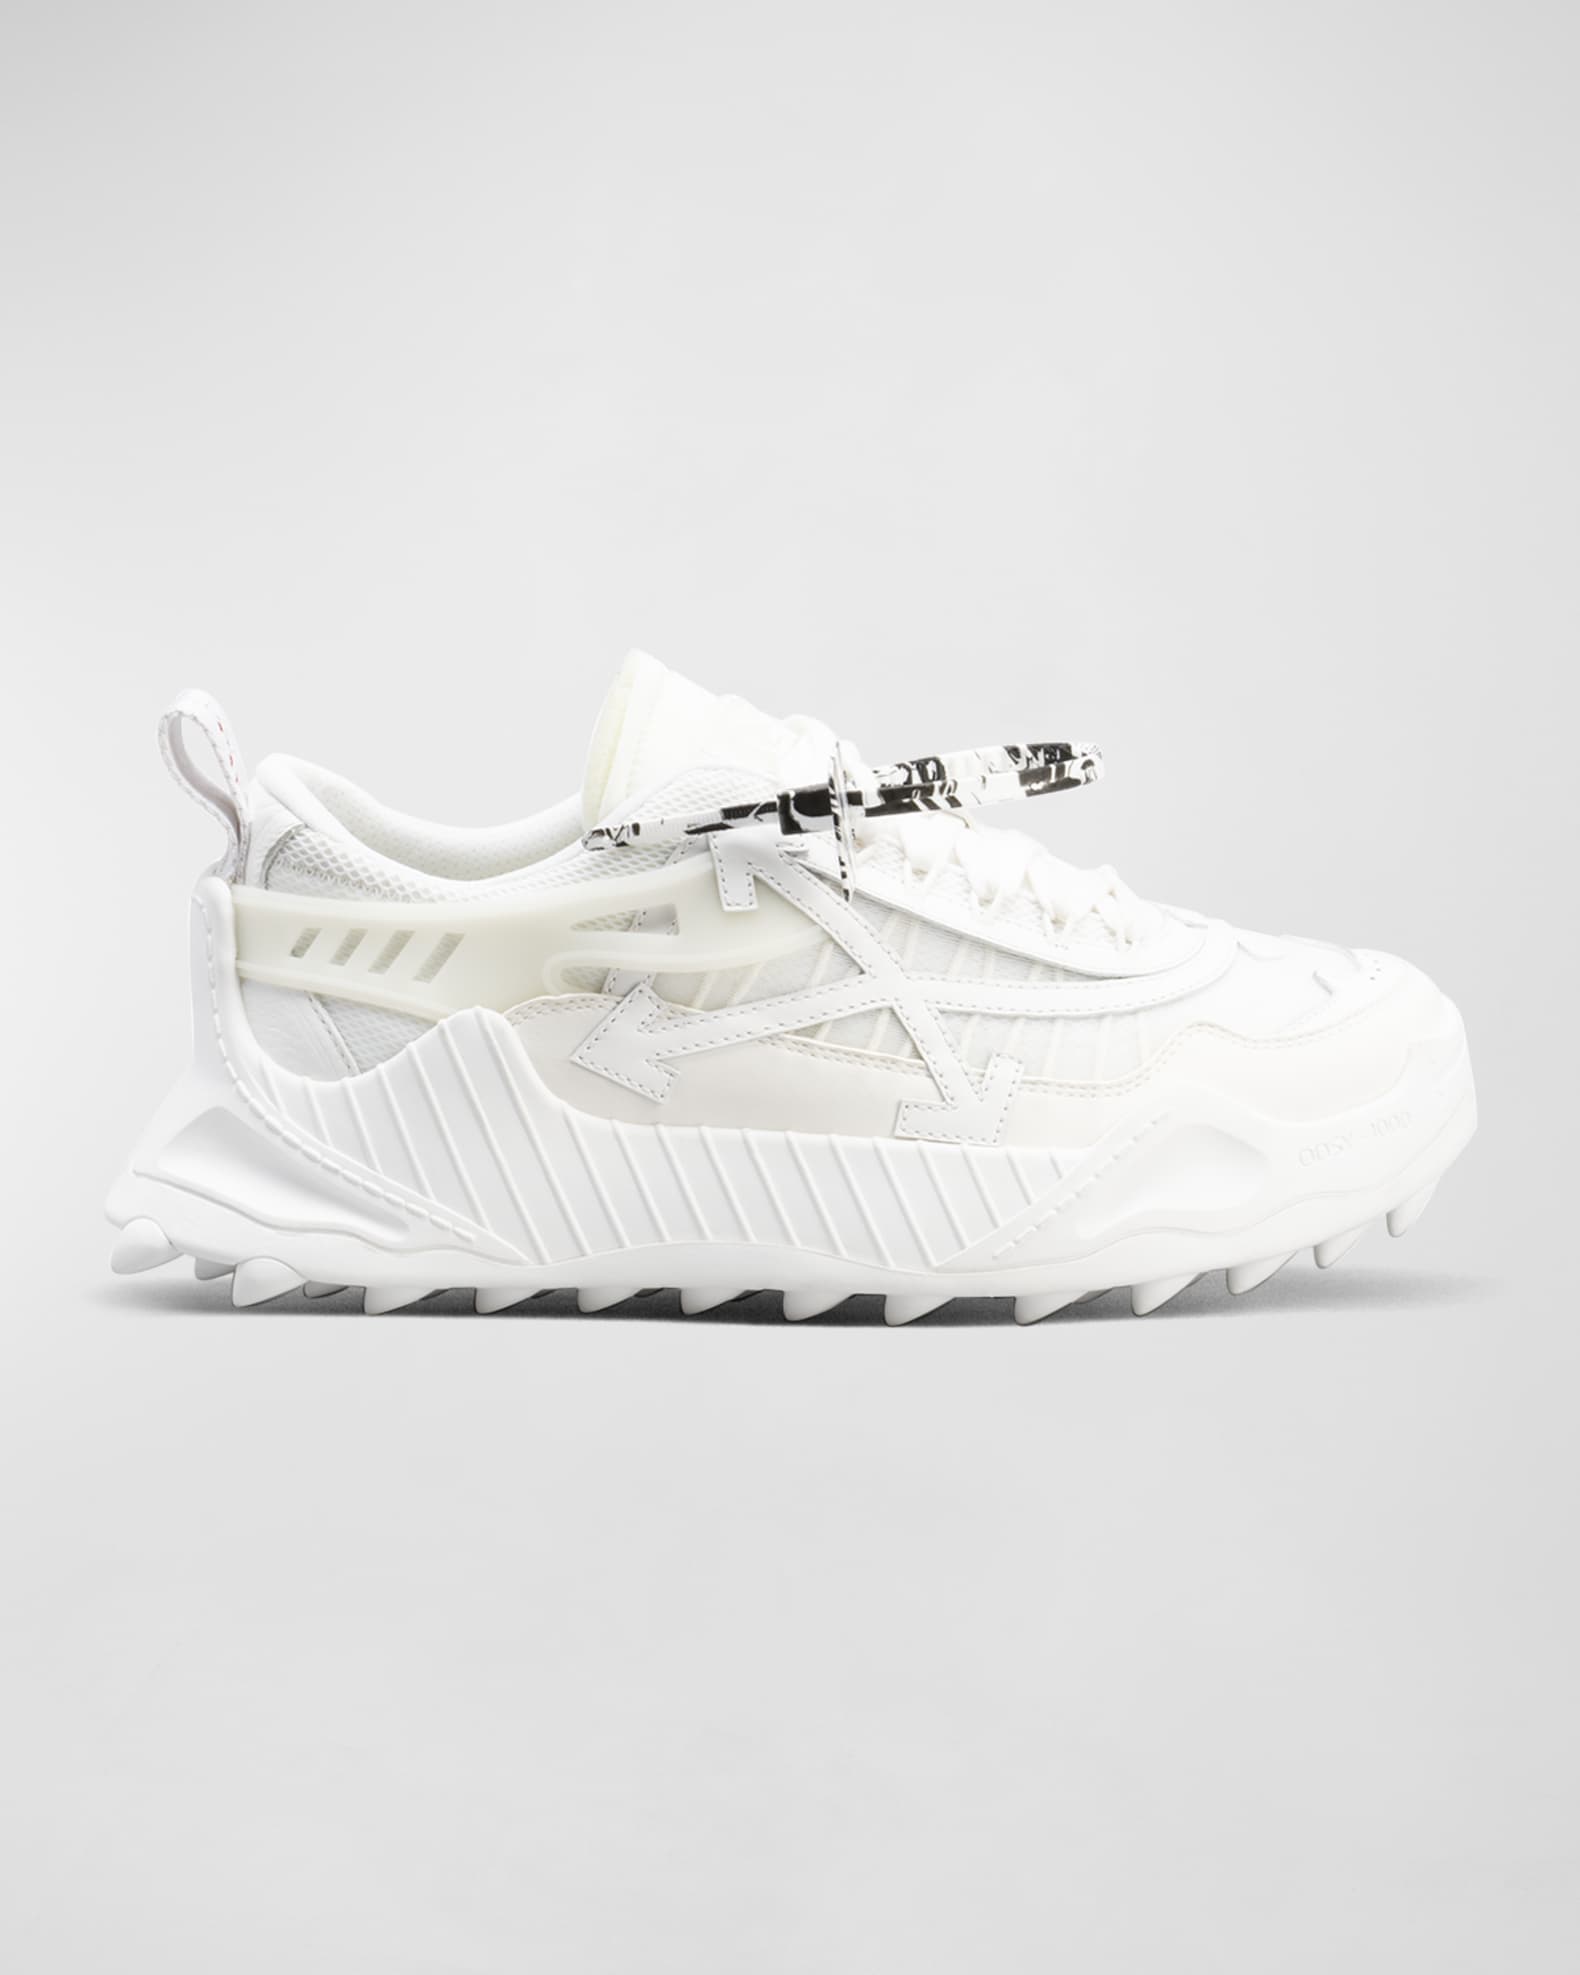 Off-White Takes On the Bulky Running Sneaker